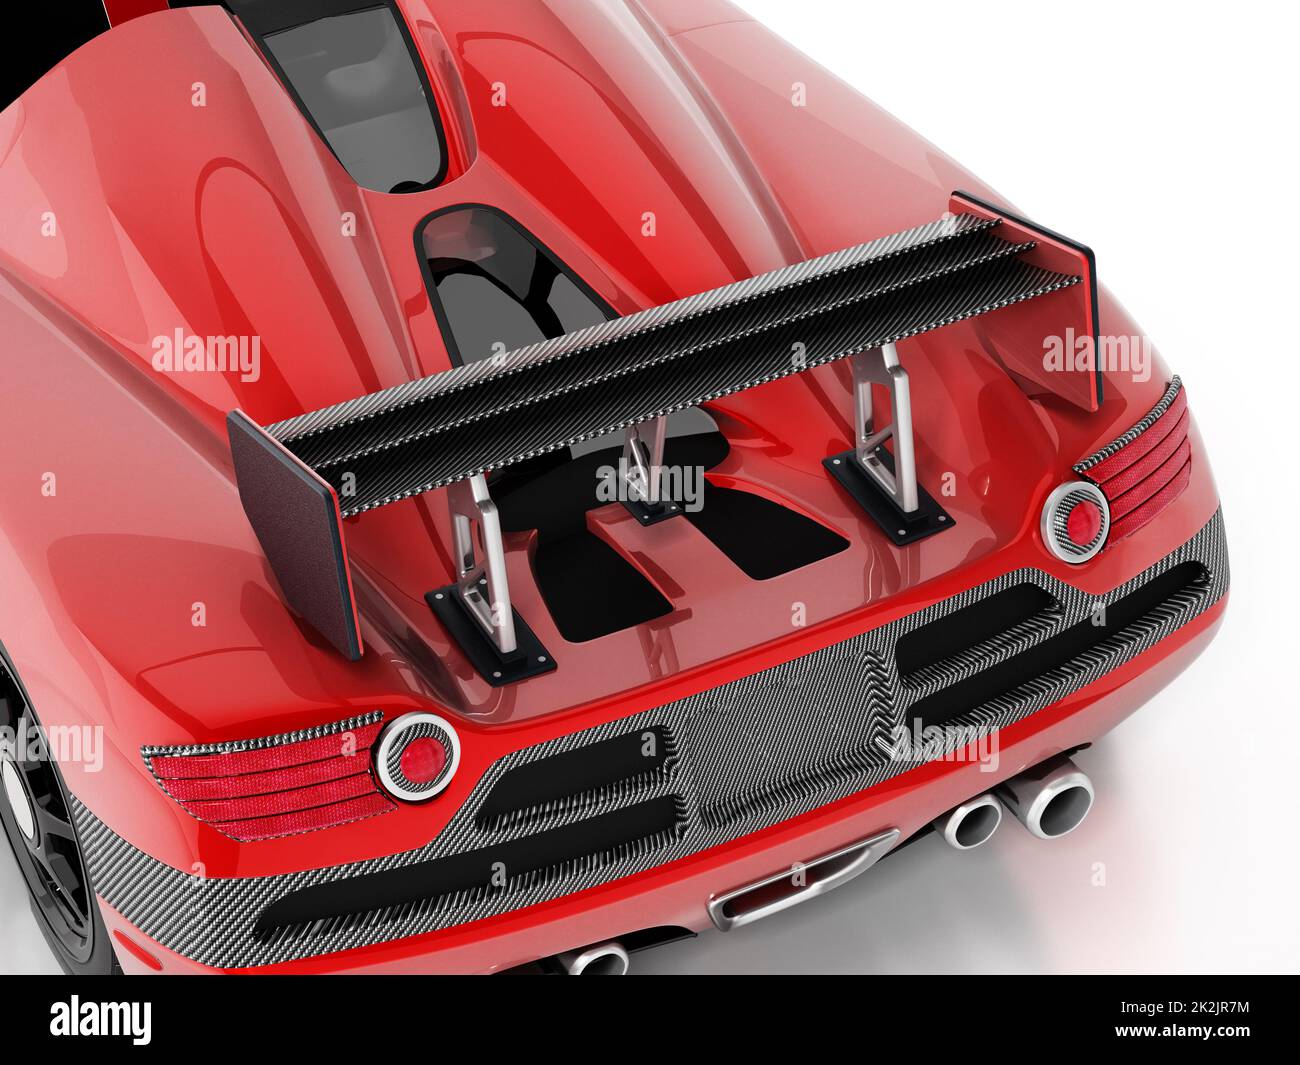 Red race car with carbon fiber spoiler. 3D illustration Stock Photo